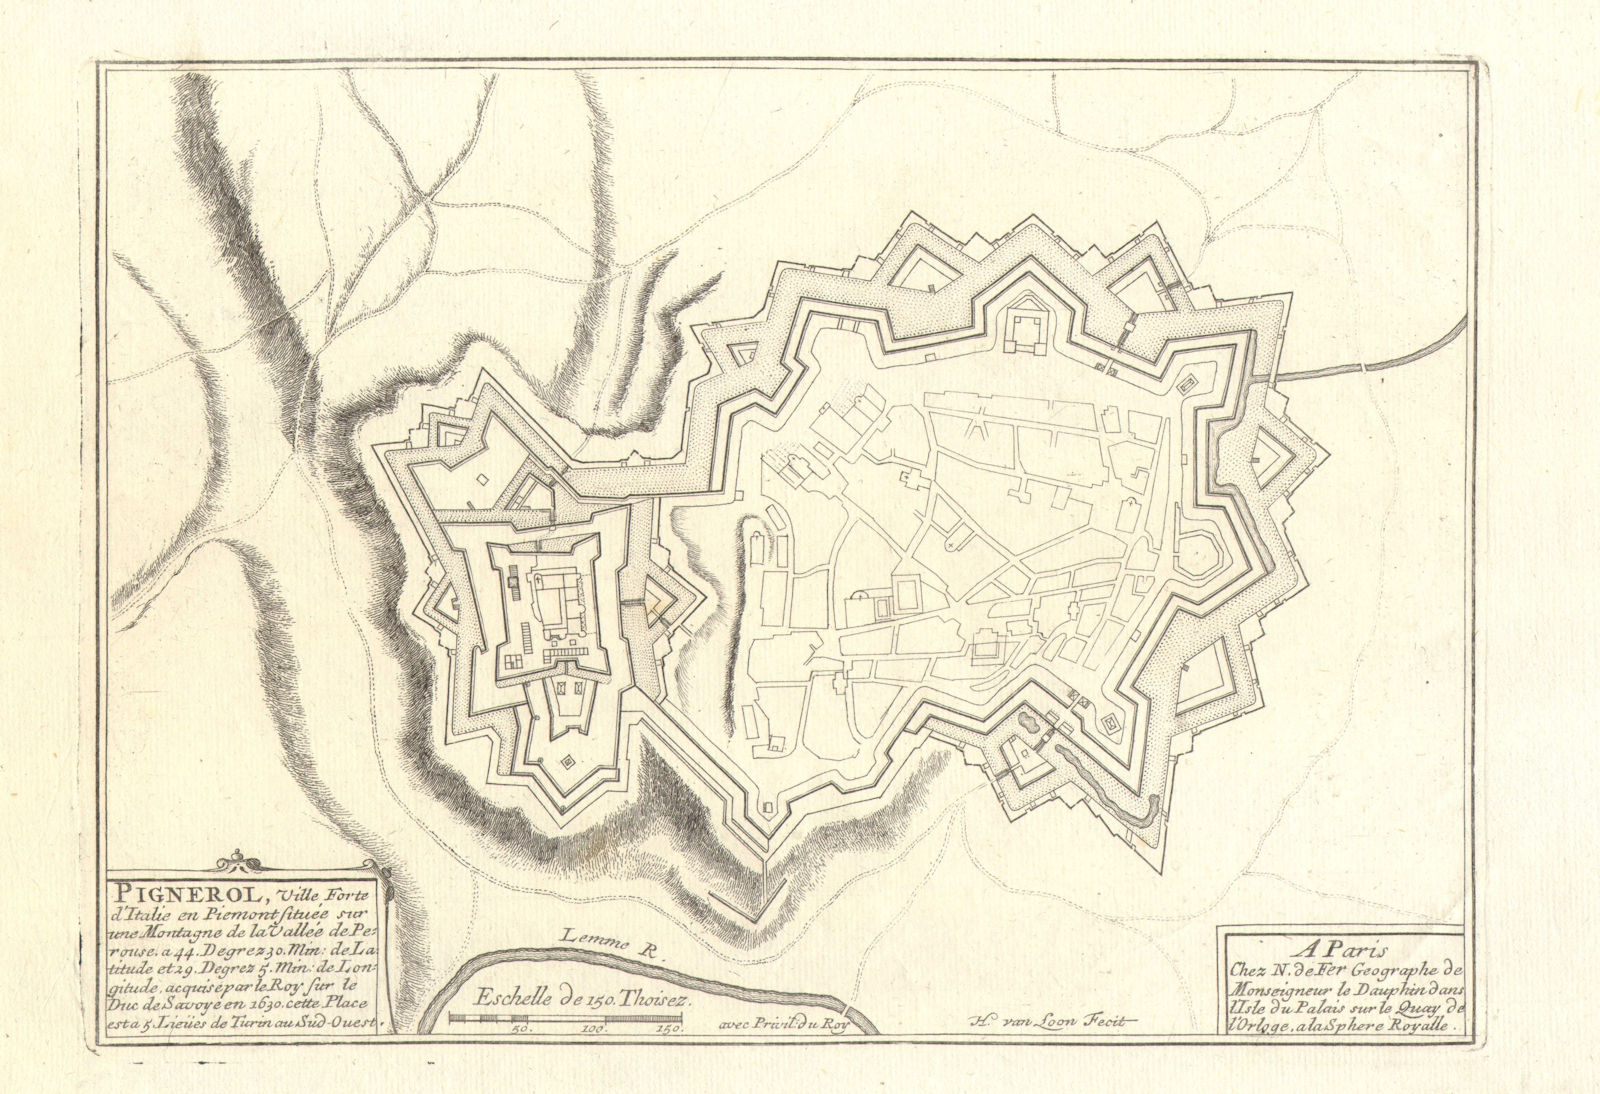 'Pignerol'. Pinerolo. Plan of town/city & fortifications. Italy. DE FER 1705 map